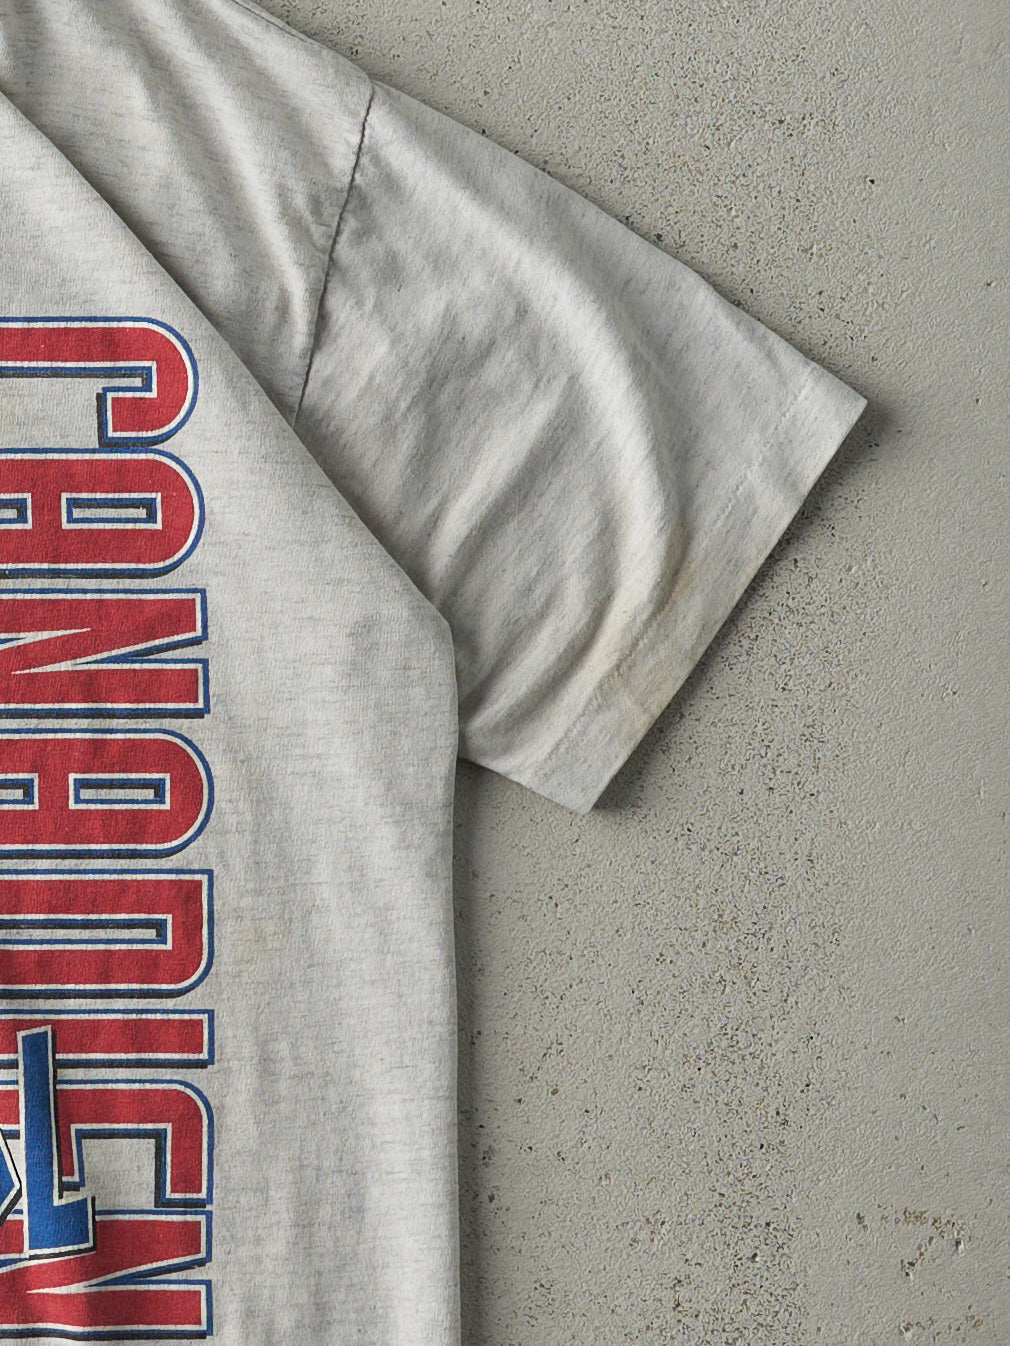 Vintage 90s Heather Grey Montreal Canadians Single Stitch Tee (S)